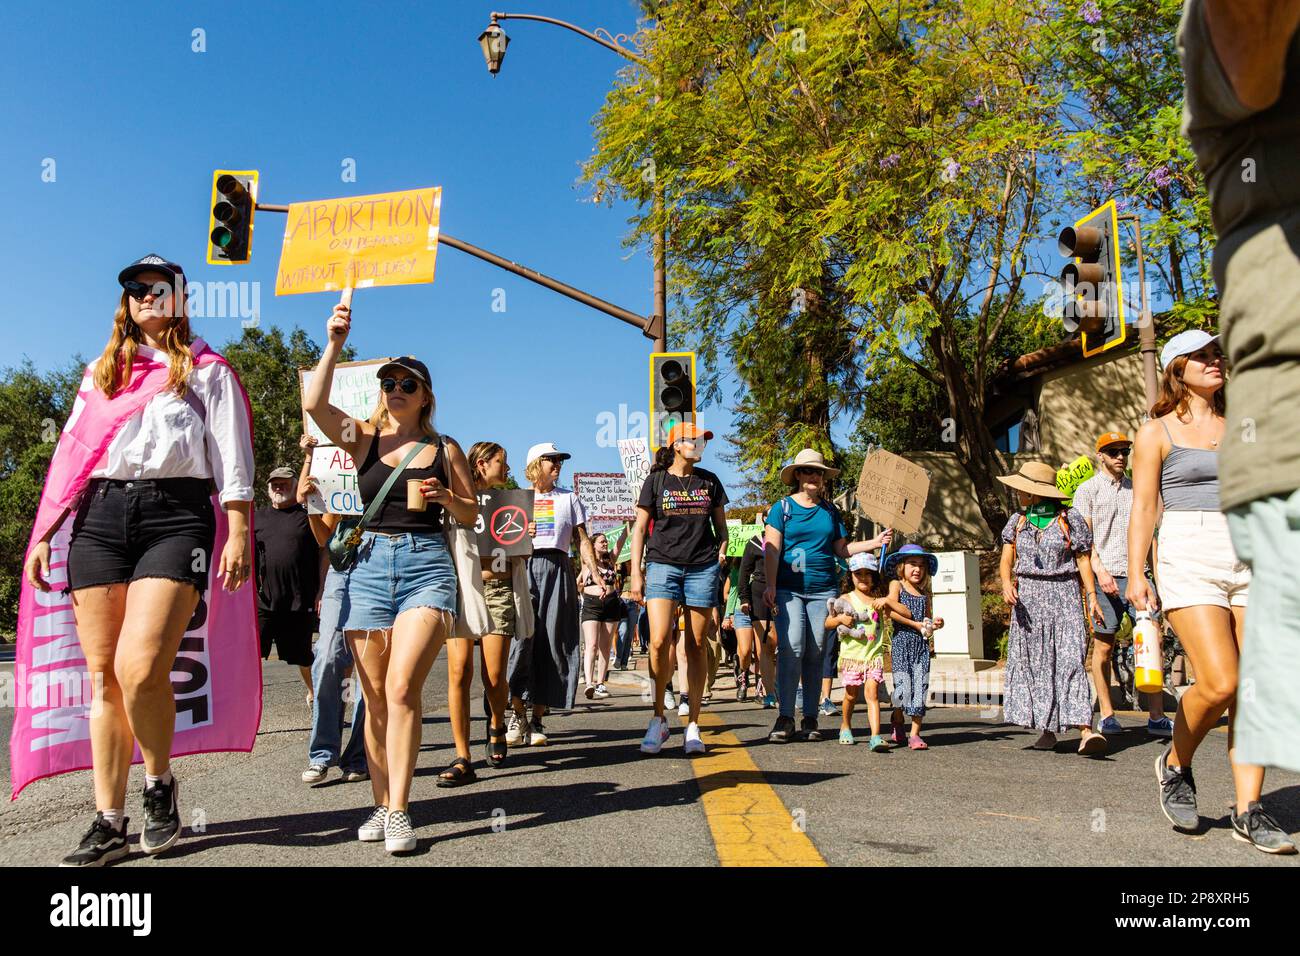 Local community turns out for the Women's March protesting the overturning of Roe v Wade in a small town. Ojai, California. Stock Photo